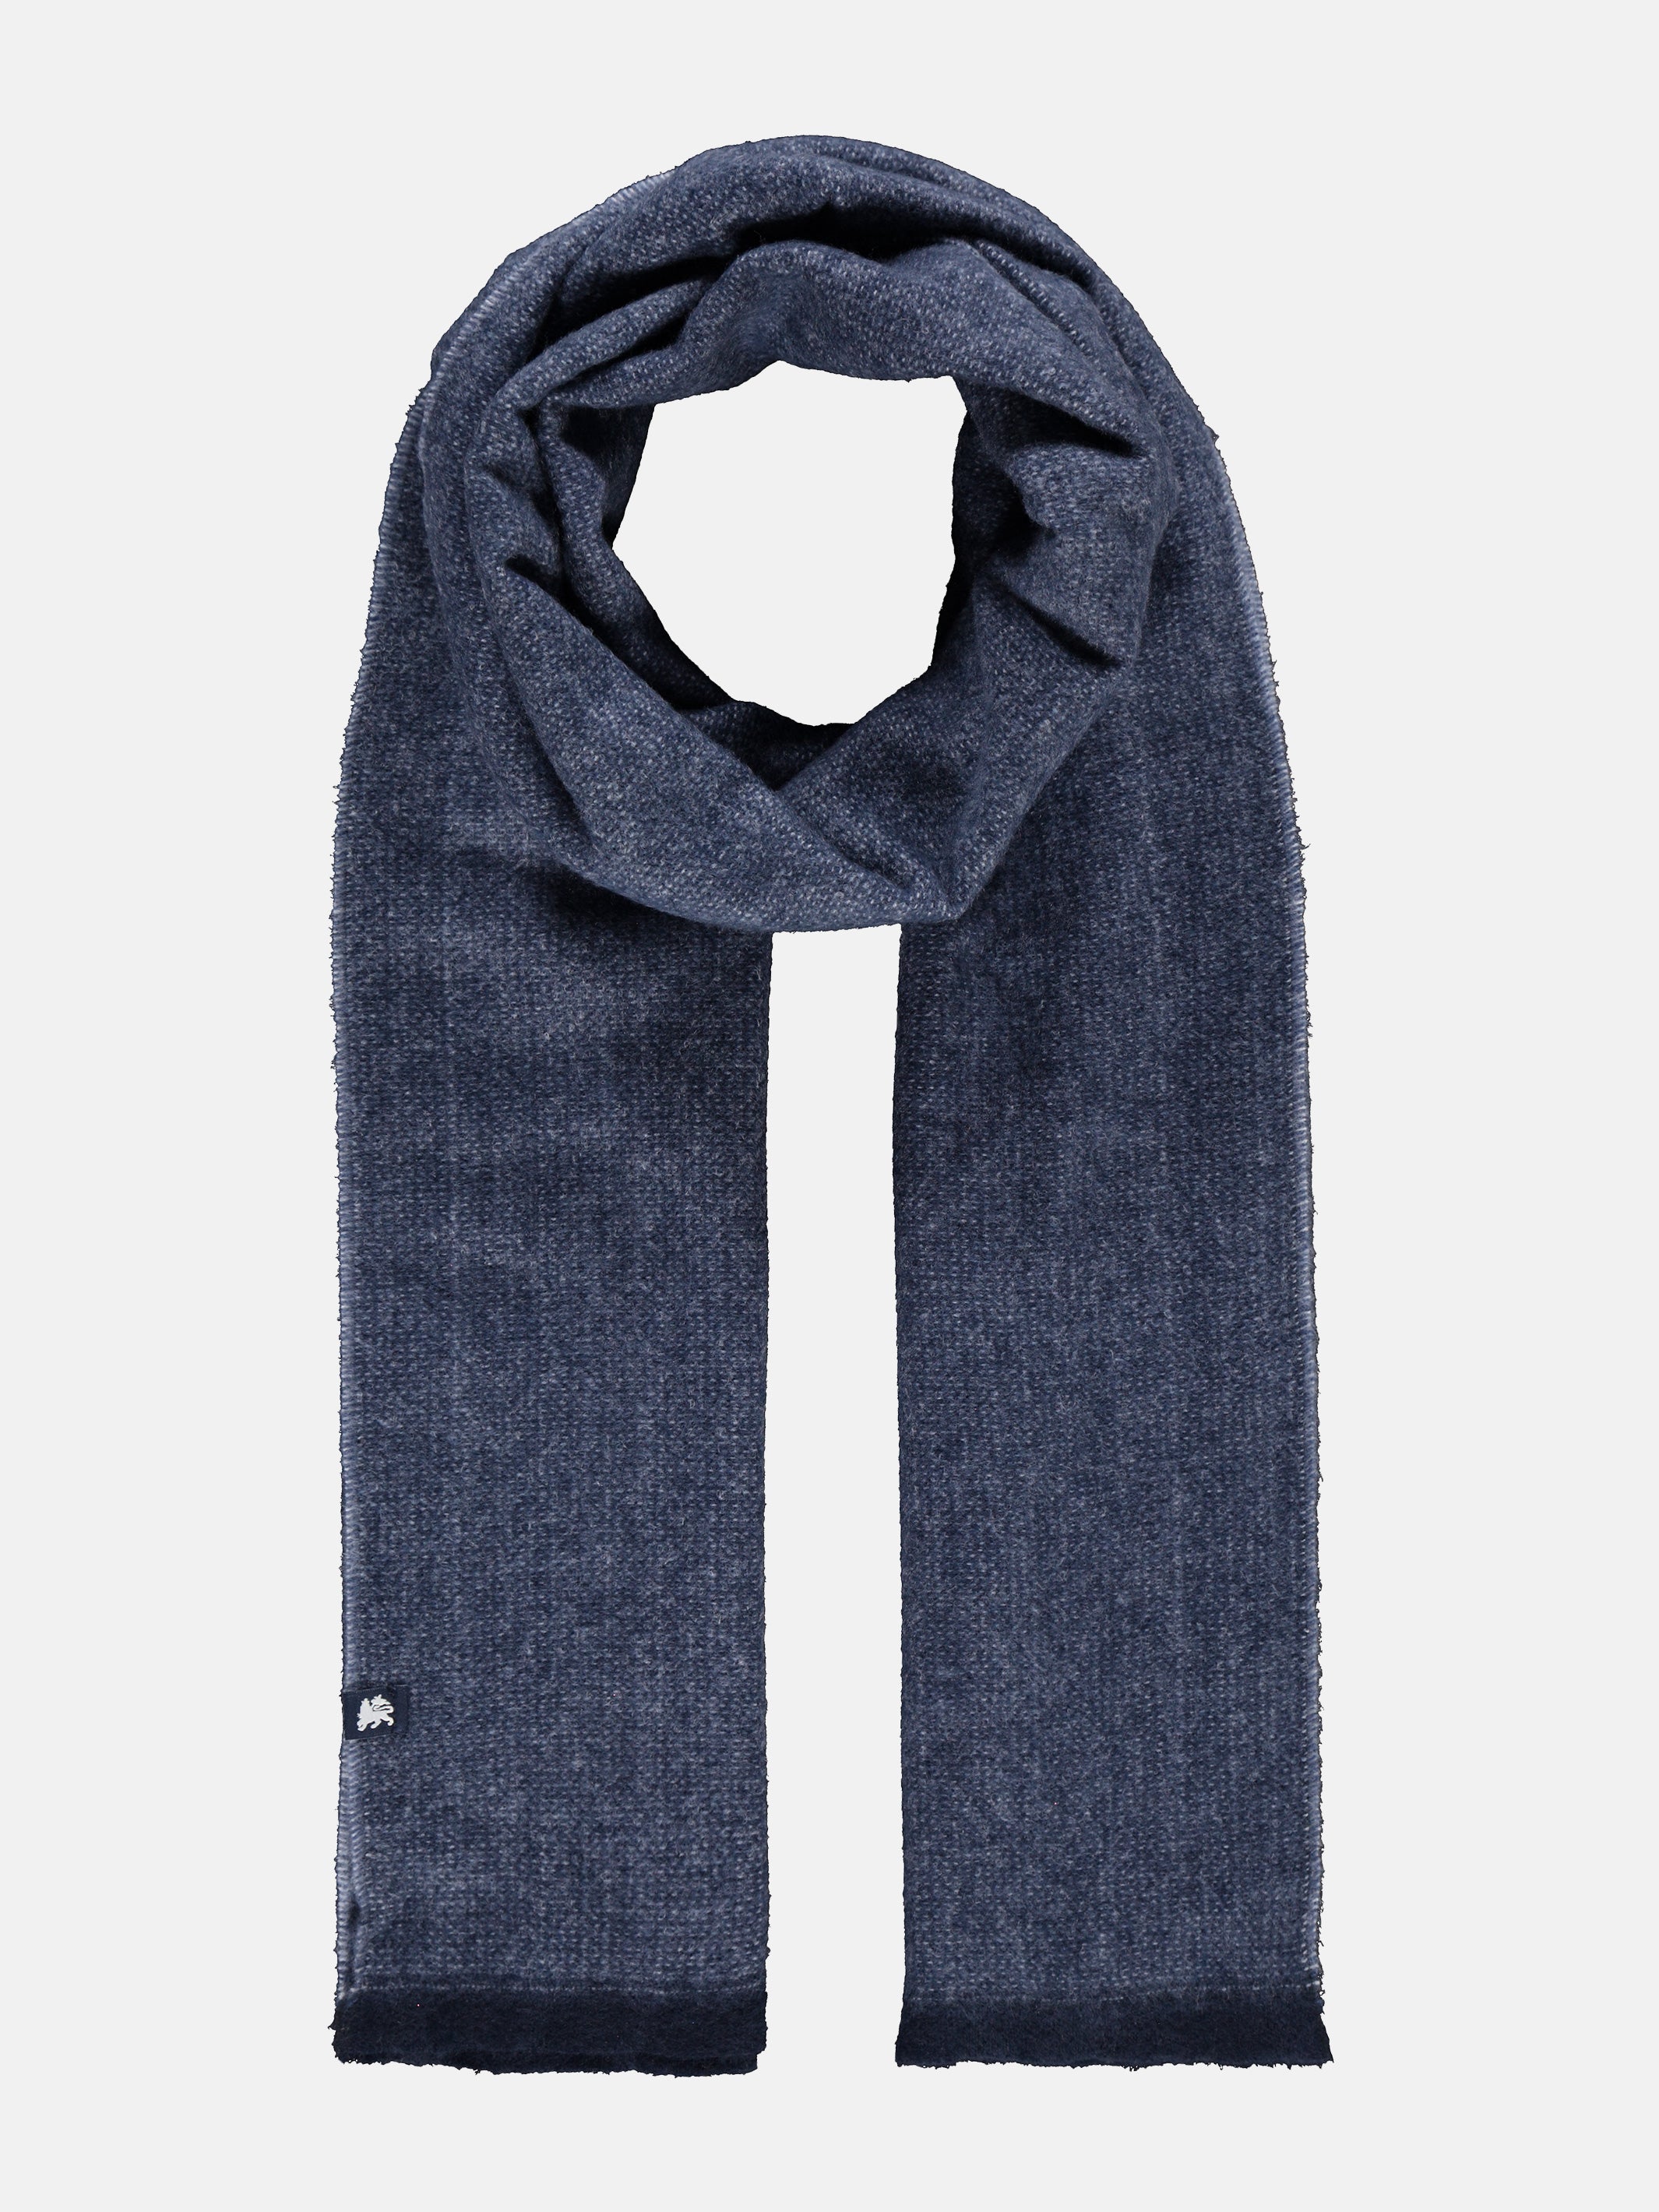 Woven scarf *Soft SHOP touch* LERROS –